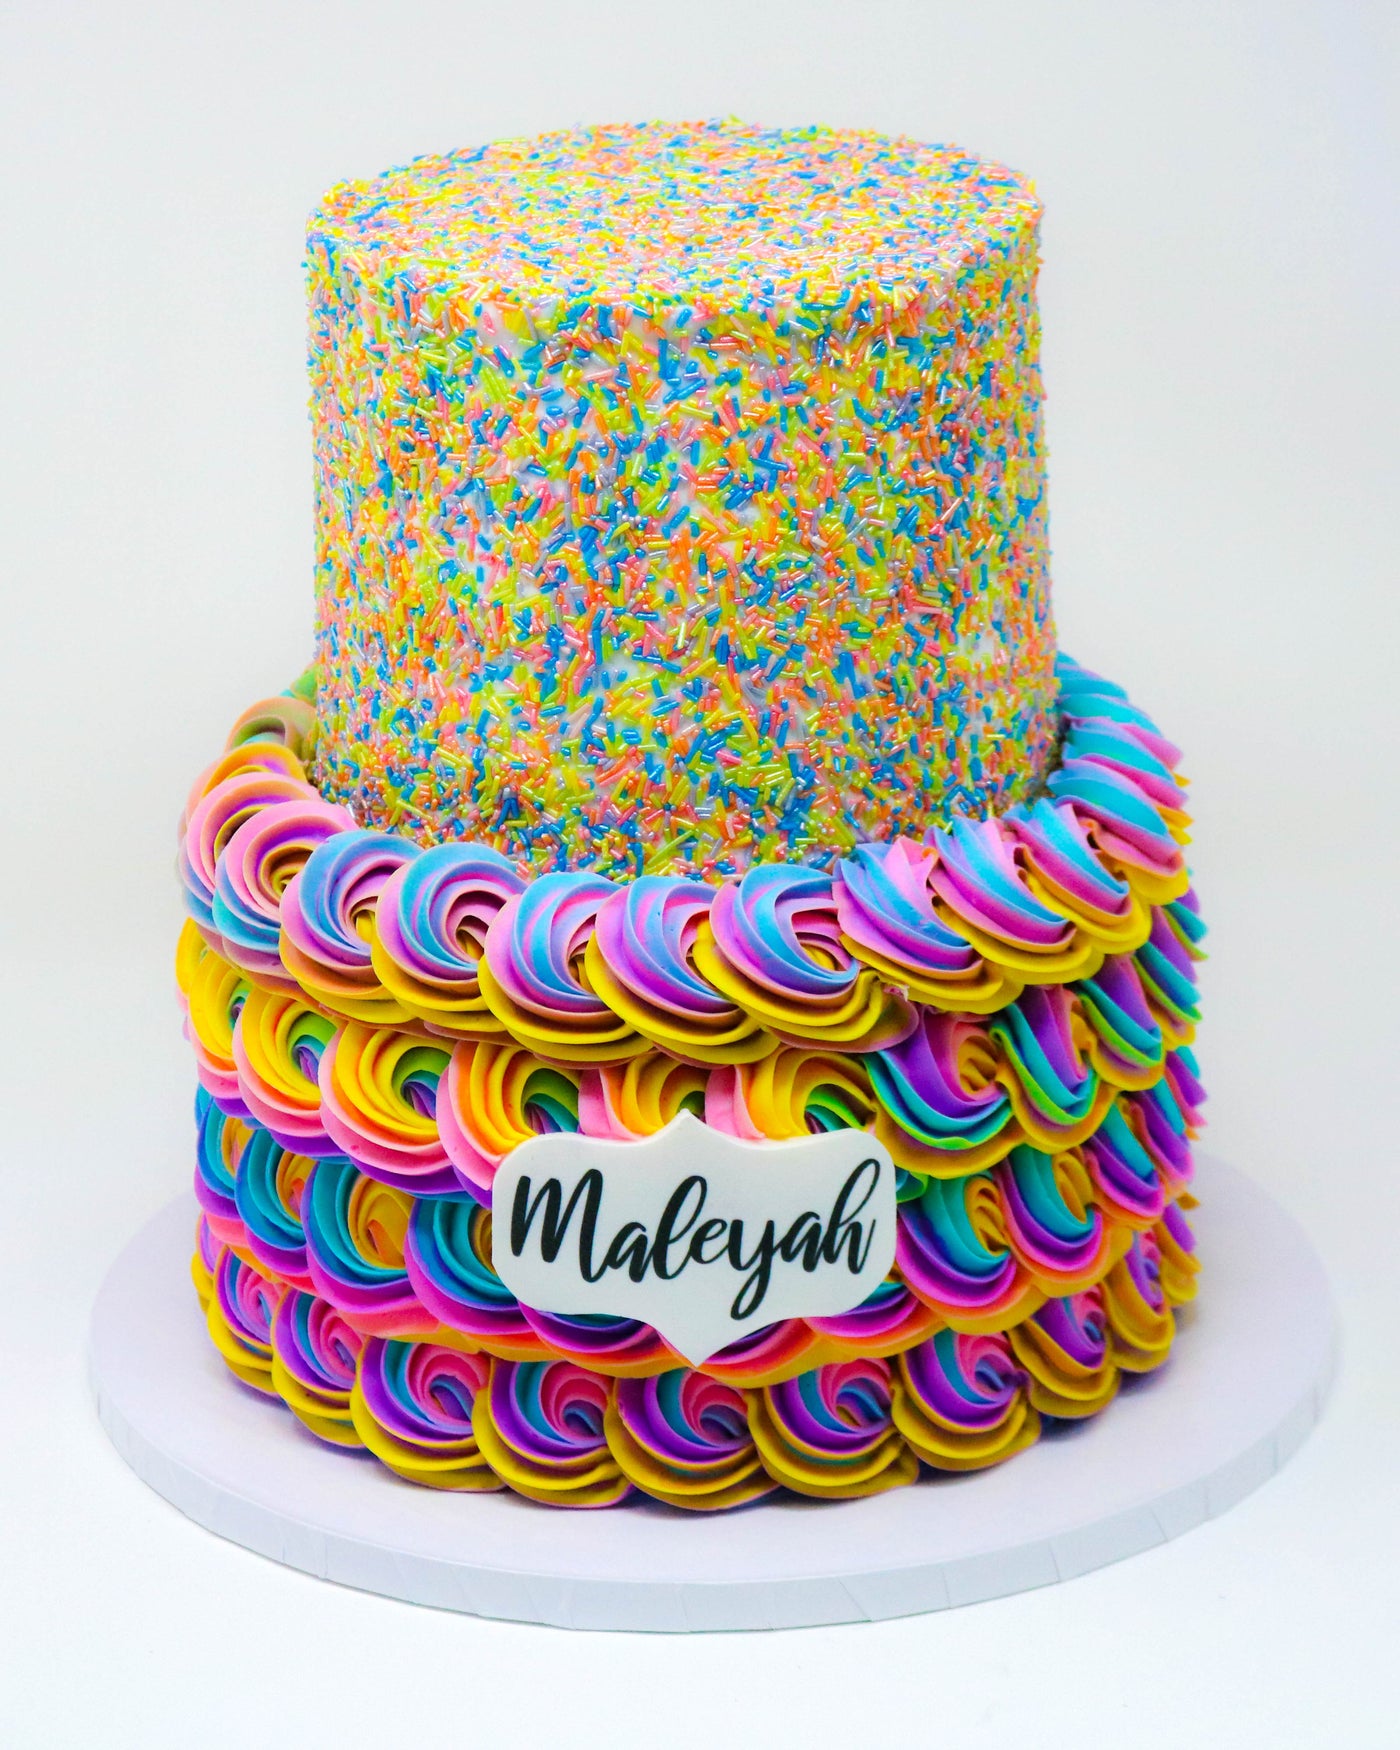 Colorful Sprinkles and Rosettes cake